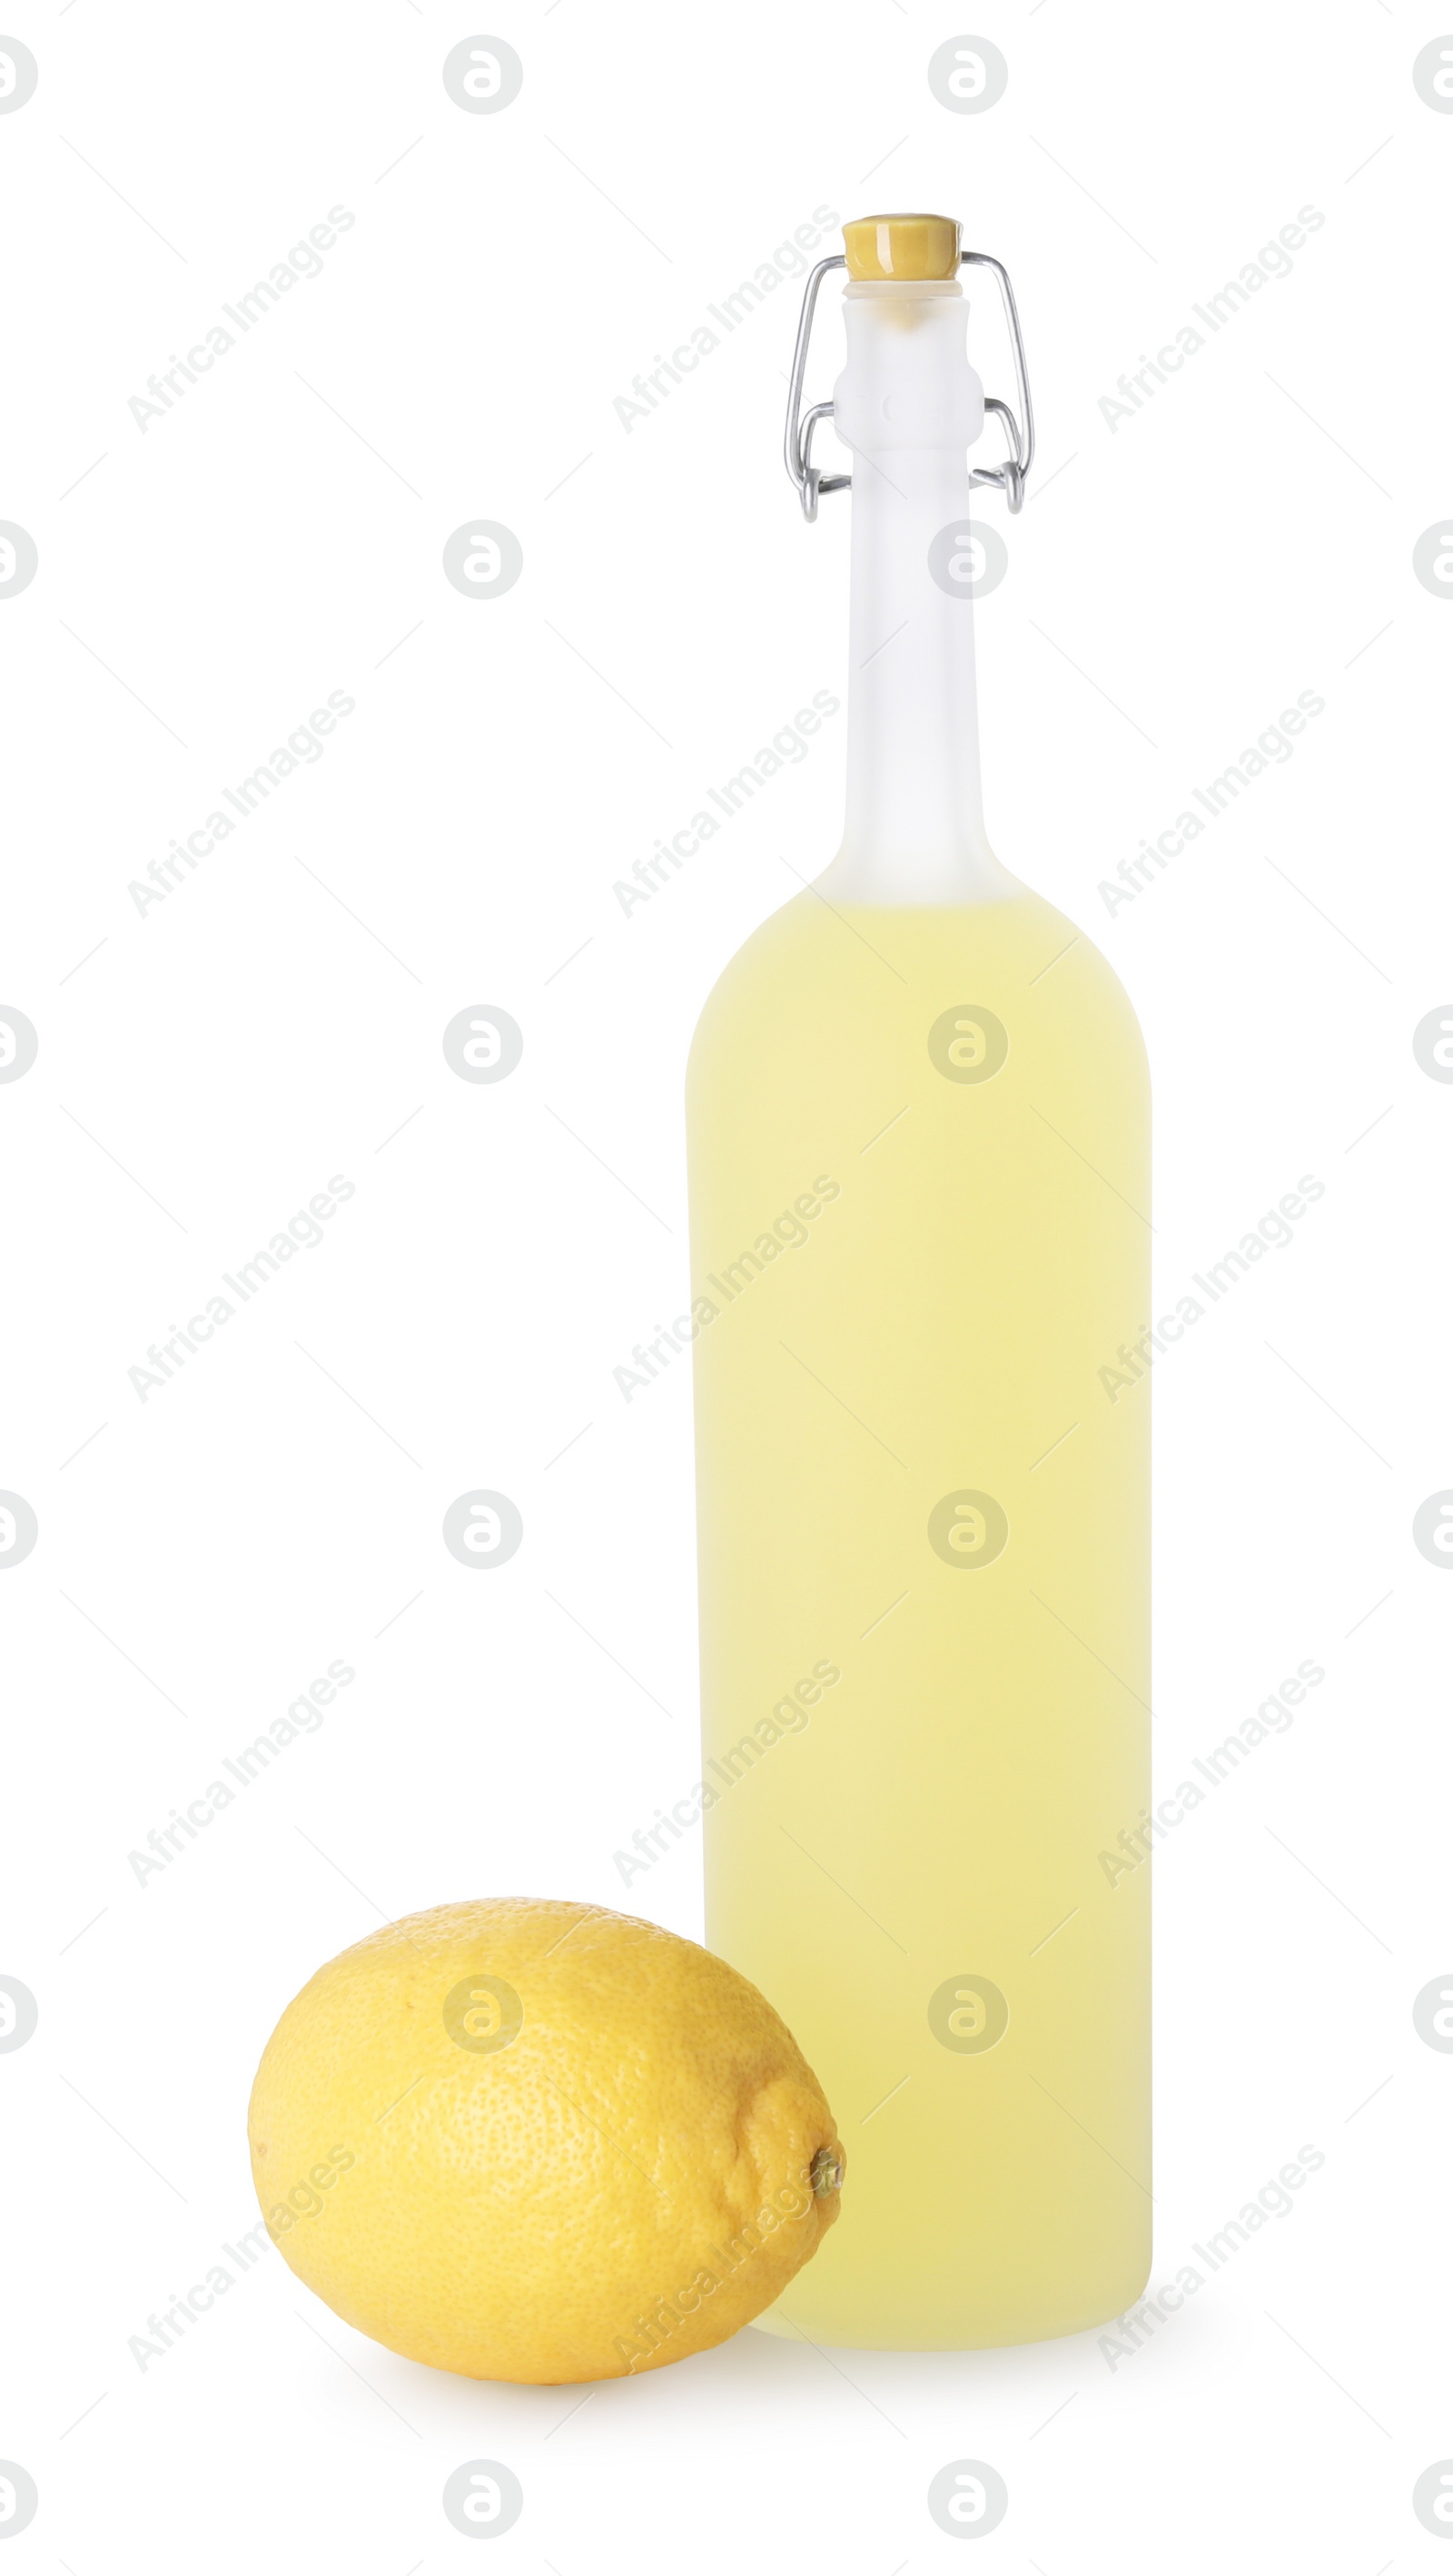 Photo of Bottle of tasty limoncello liqueur and lemon isolated on white